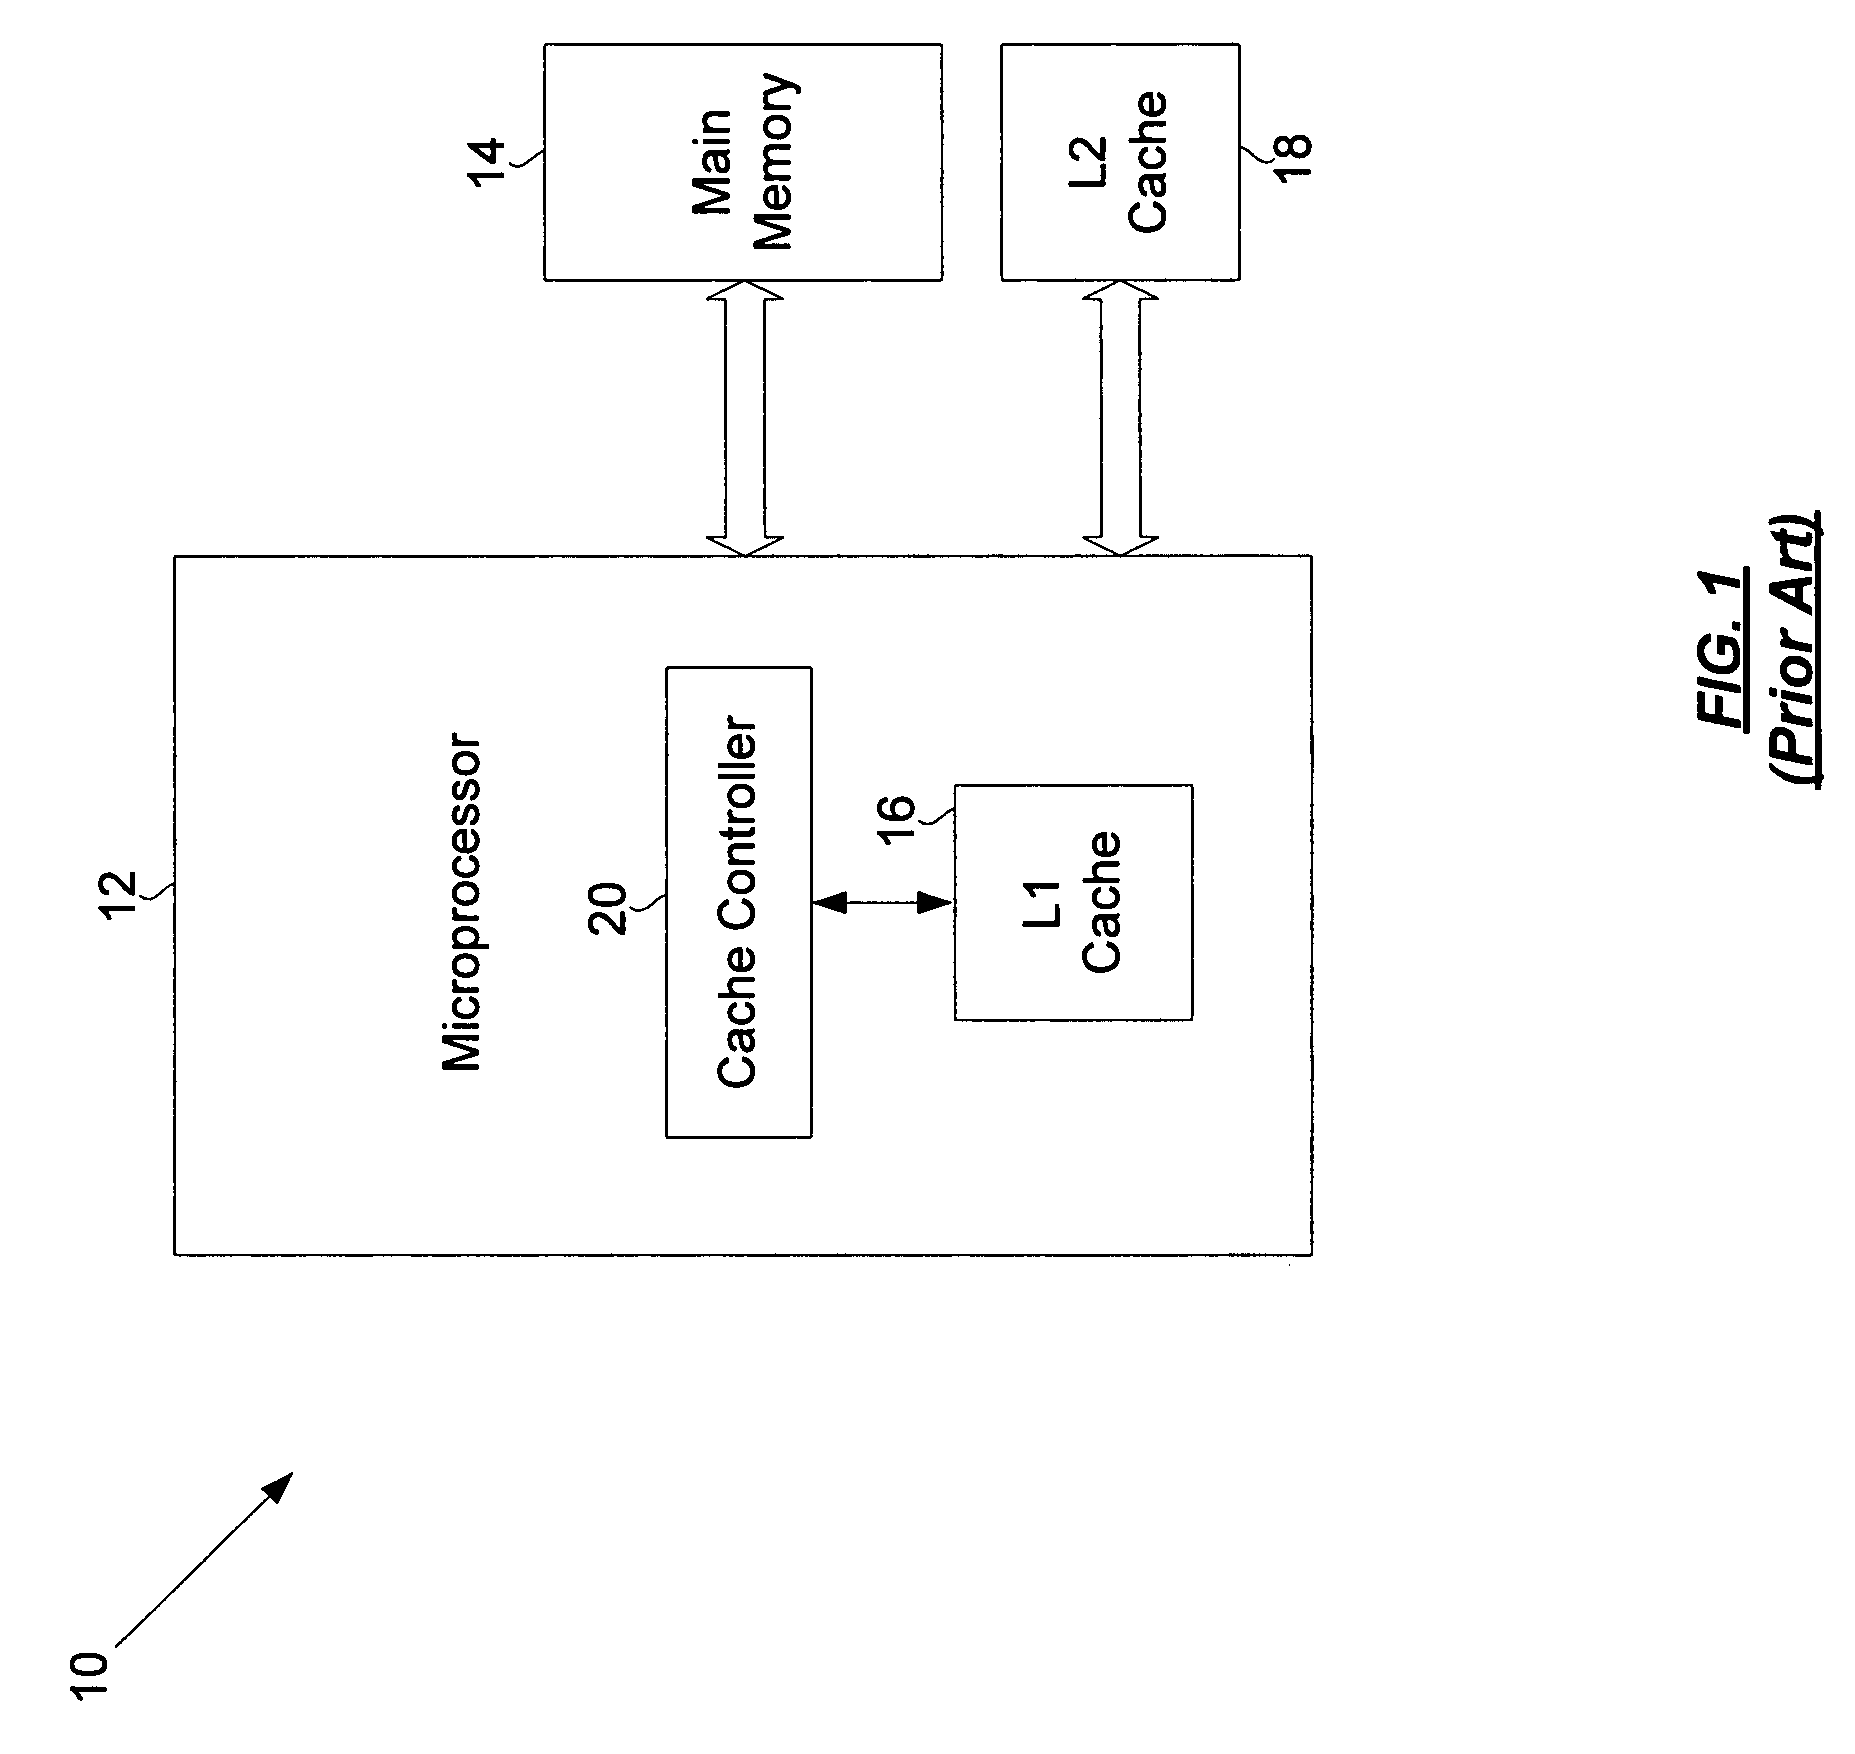 Conservative shadow cache support in a point-to-point connected multiprocessing node